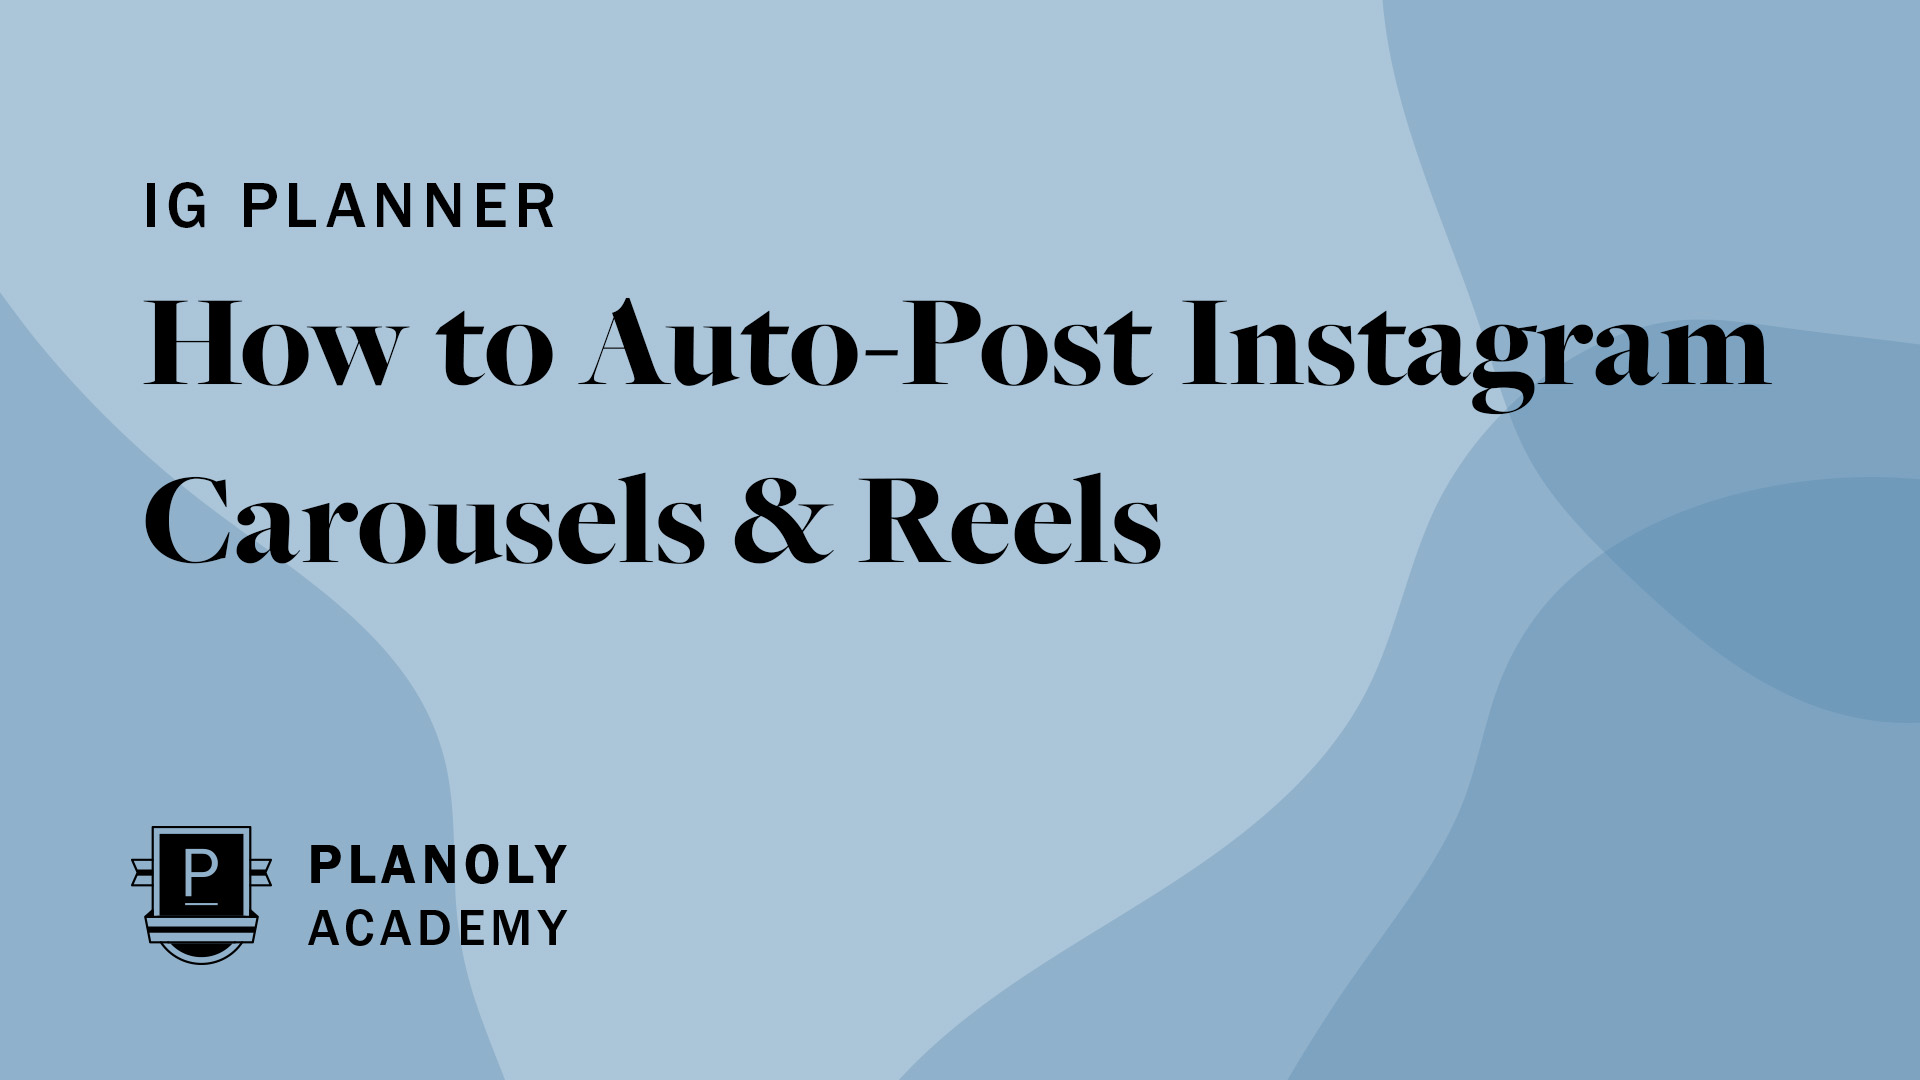 How to Auto-Post Instagram Carousels & Reels